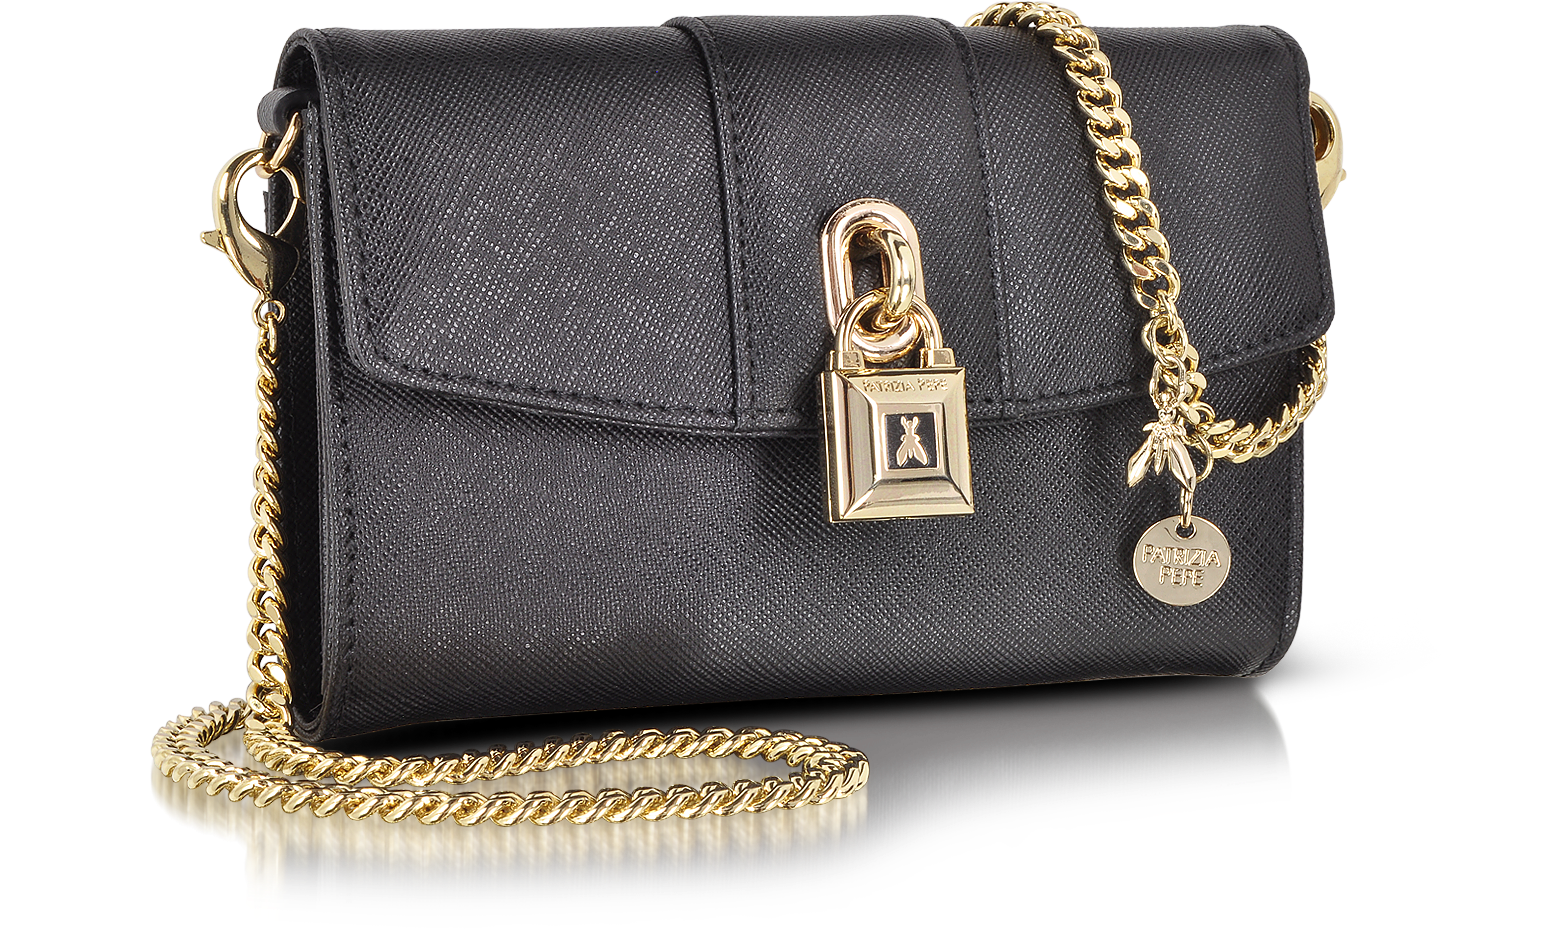 Patrizia Pepe Mini Clutch Bag in Leather with Shoulder Strap at FORZIERI